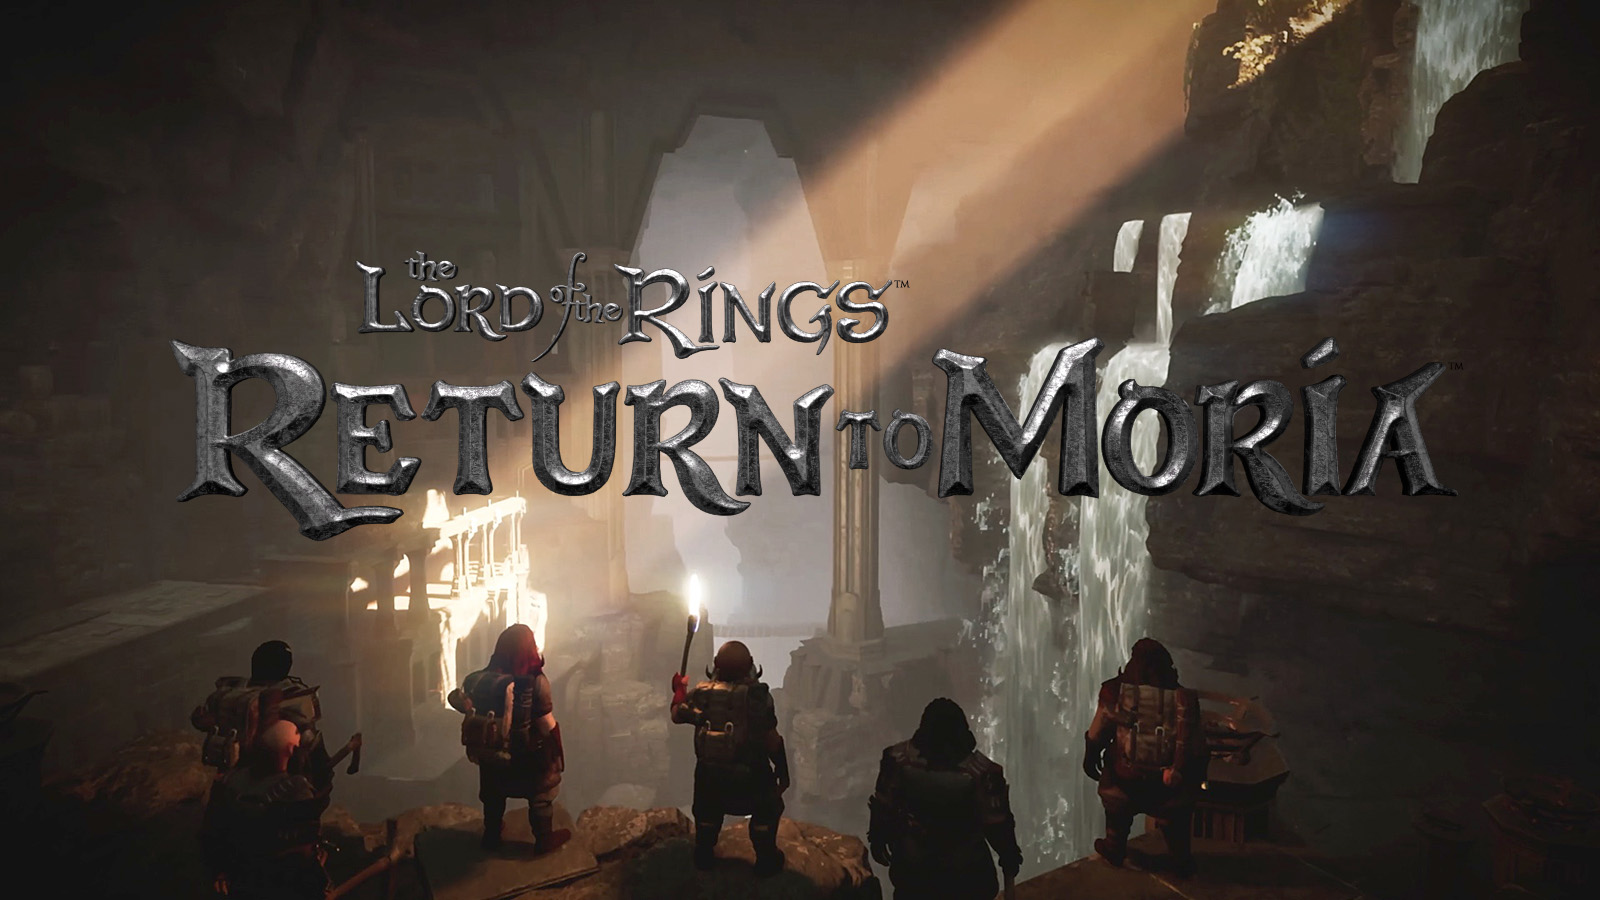 Lord Of The Rings Crafting Survival Game Announced For PC